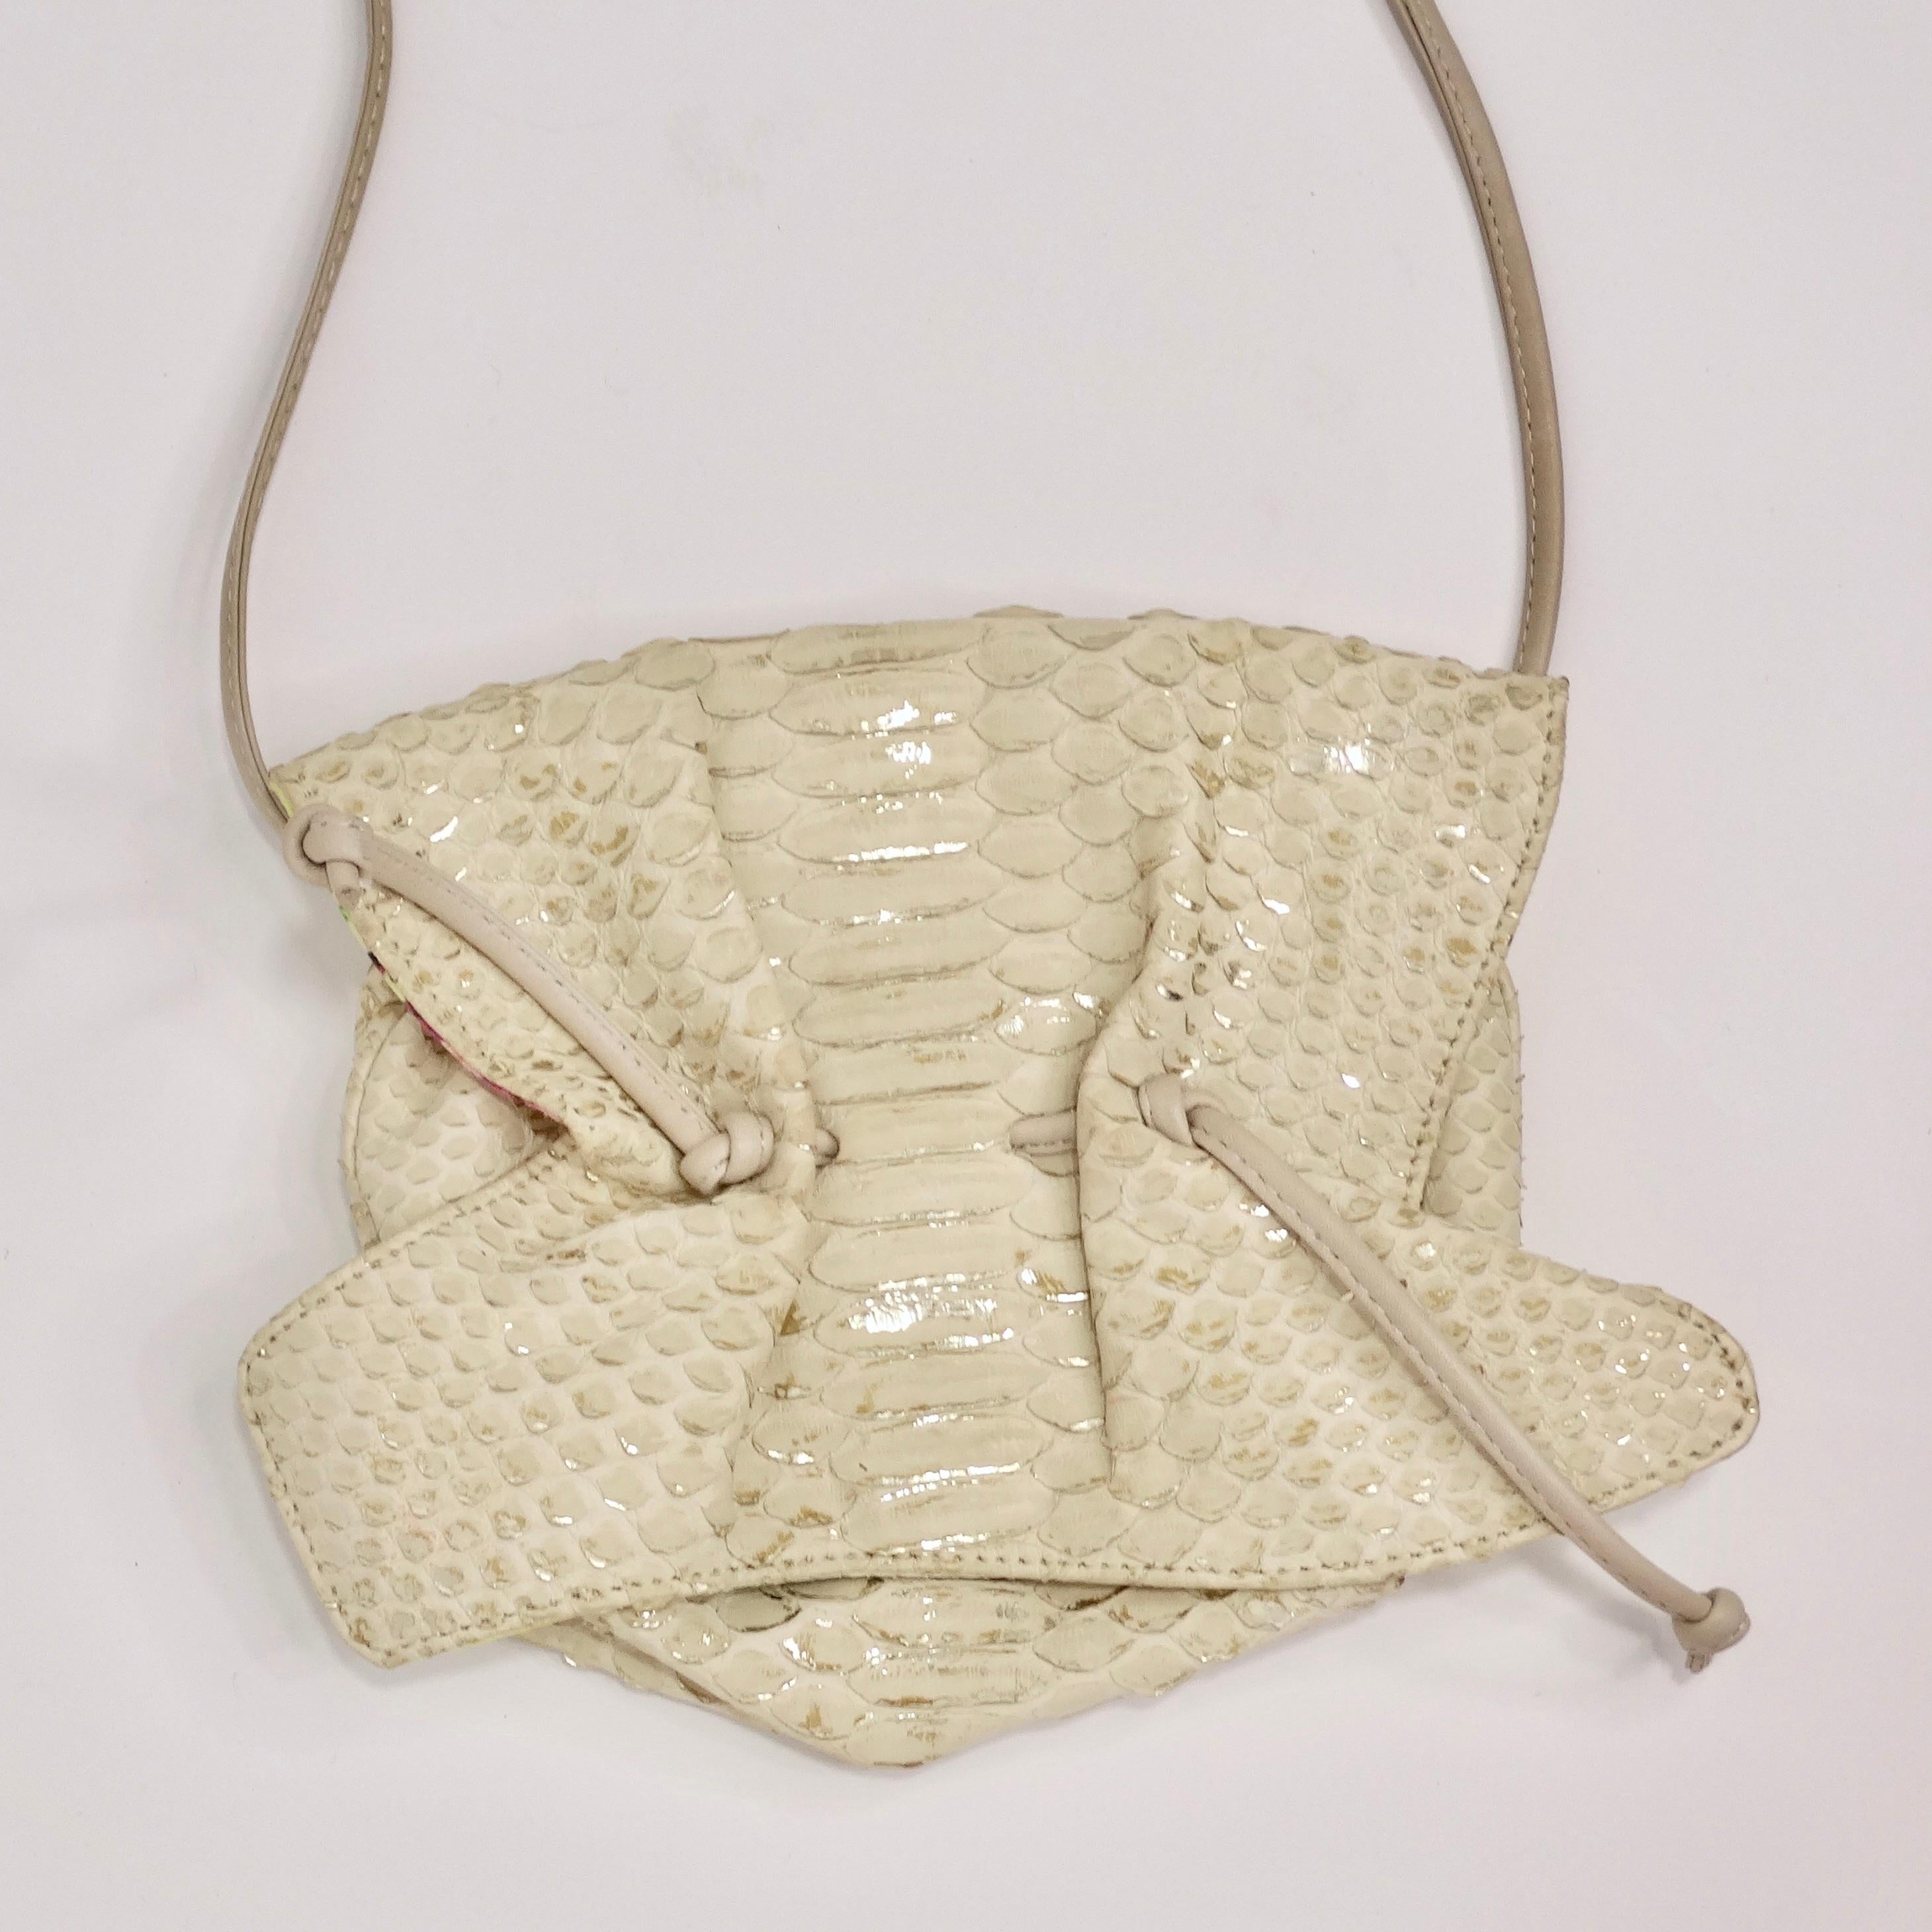 Discover the perfect blend of modern elegance and vintage charm with the Carlos Falchi Crossbody Mini Drawstring Bag. This handbag boasts a neutral creme-colored faux snake skin fabric with metallic silver accents, adding a touch of sophistication